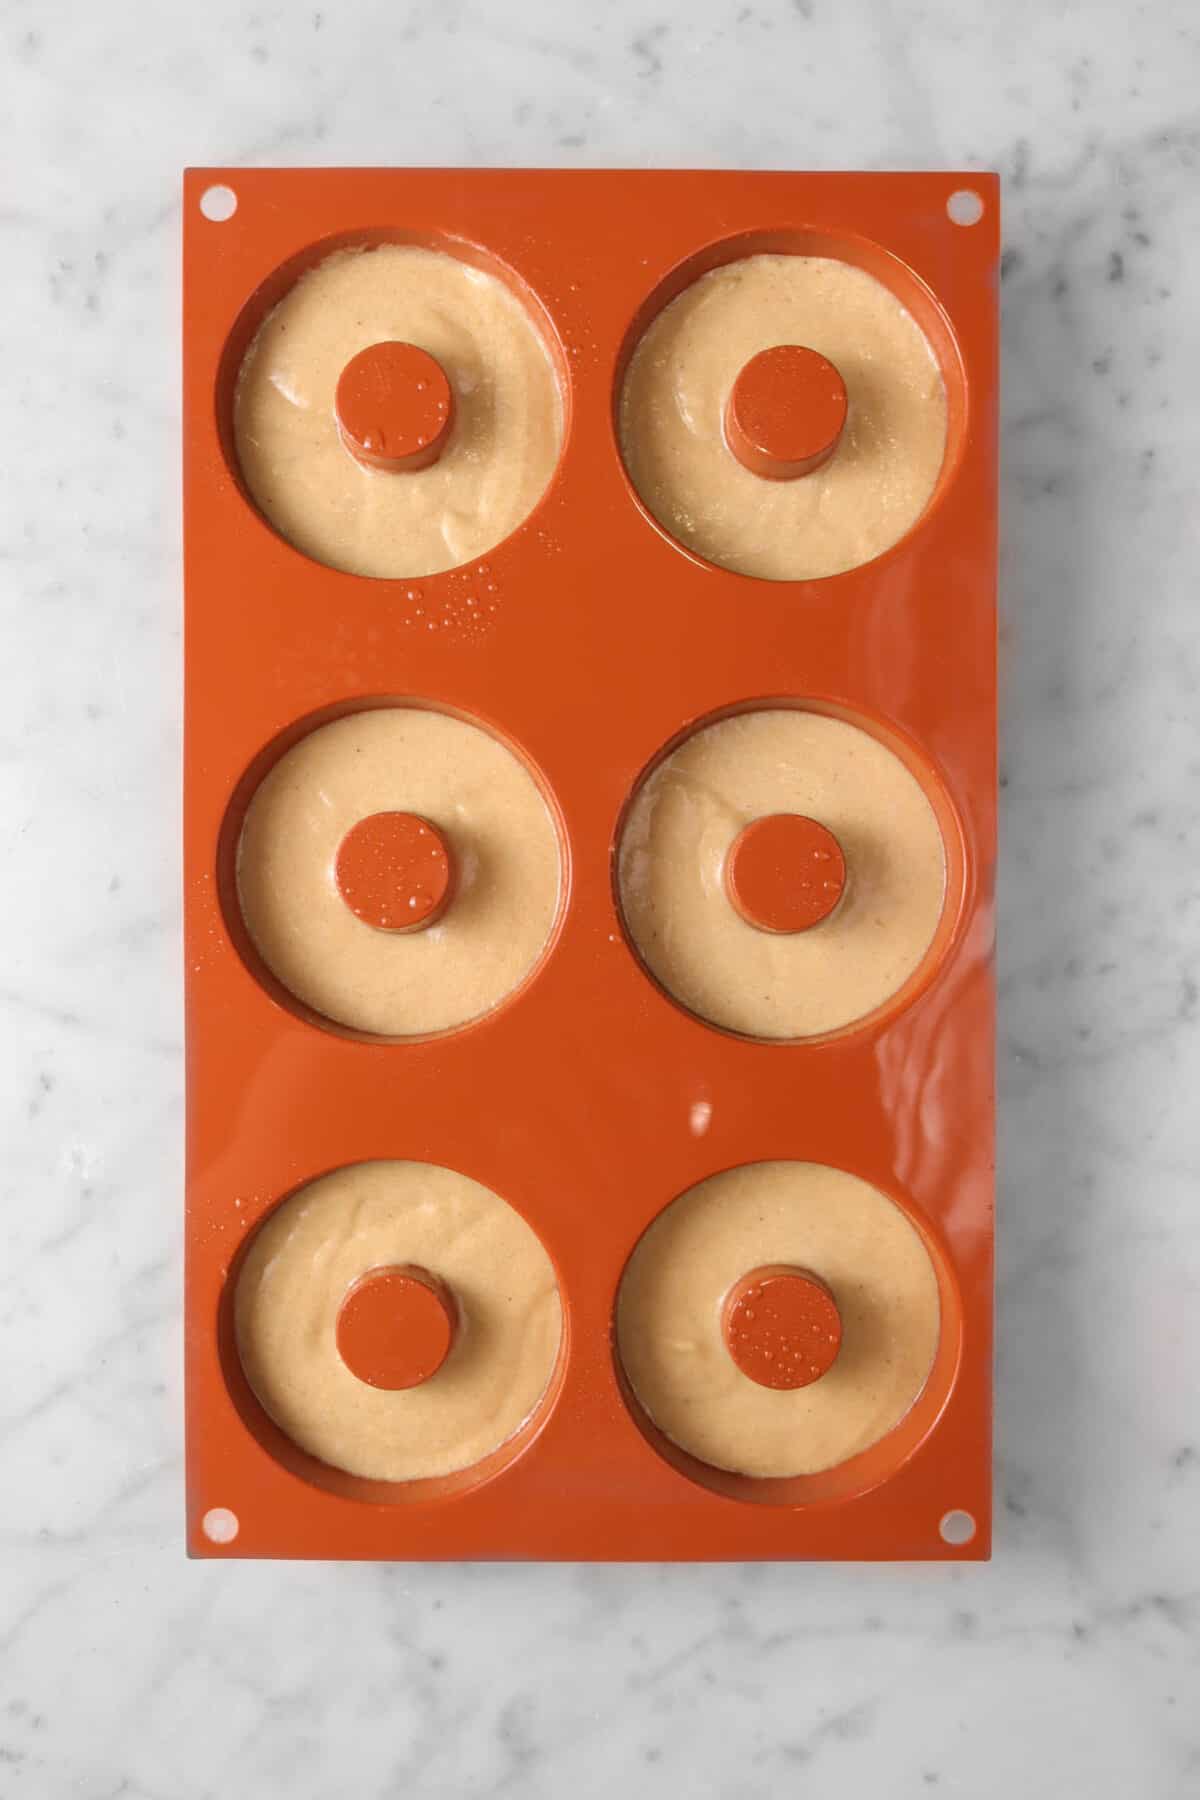 cinnamon donut batter piped into six donut molds